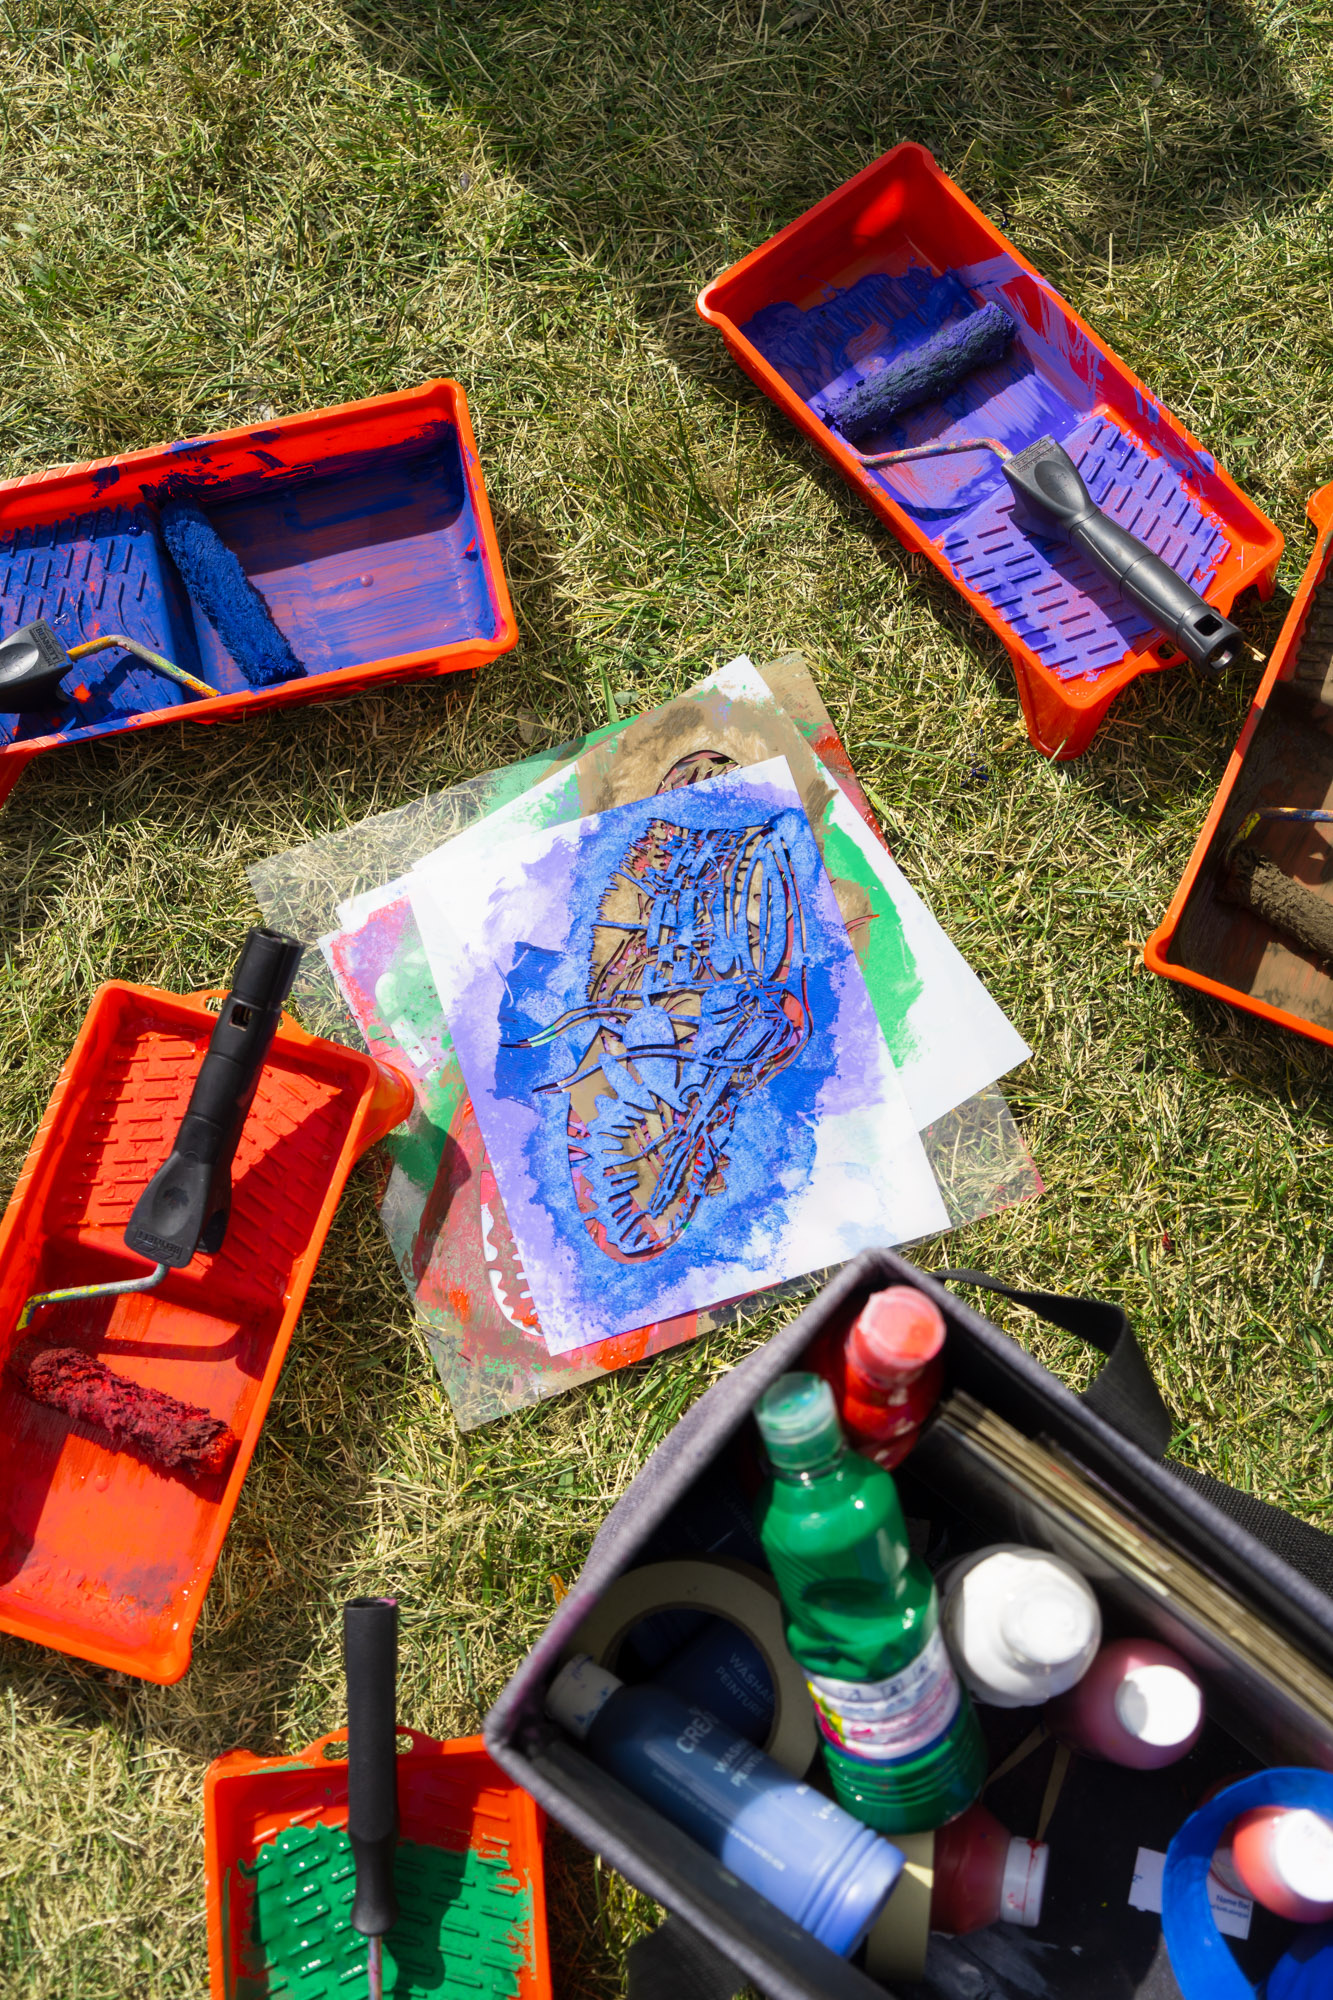 A pile of coloured moccasin stencils surrounded by paint trays, paint rollers, and a box of paint tubes